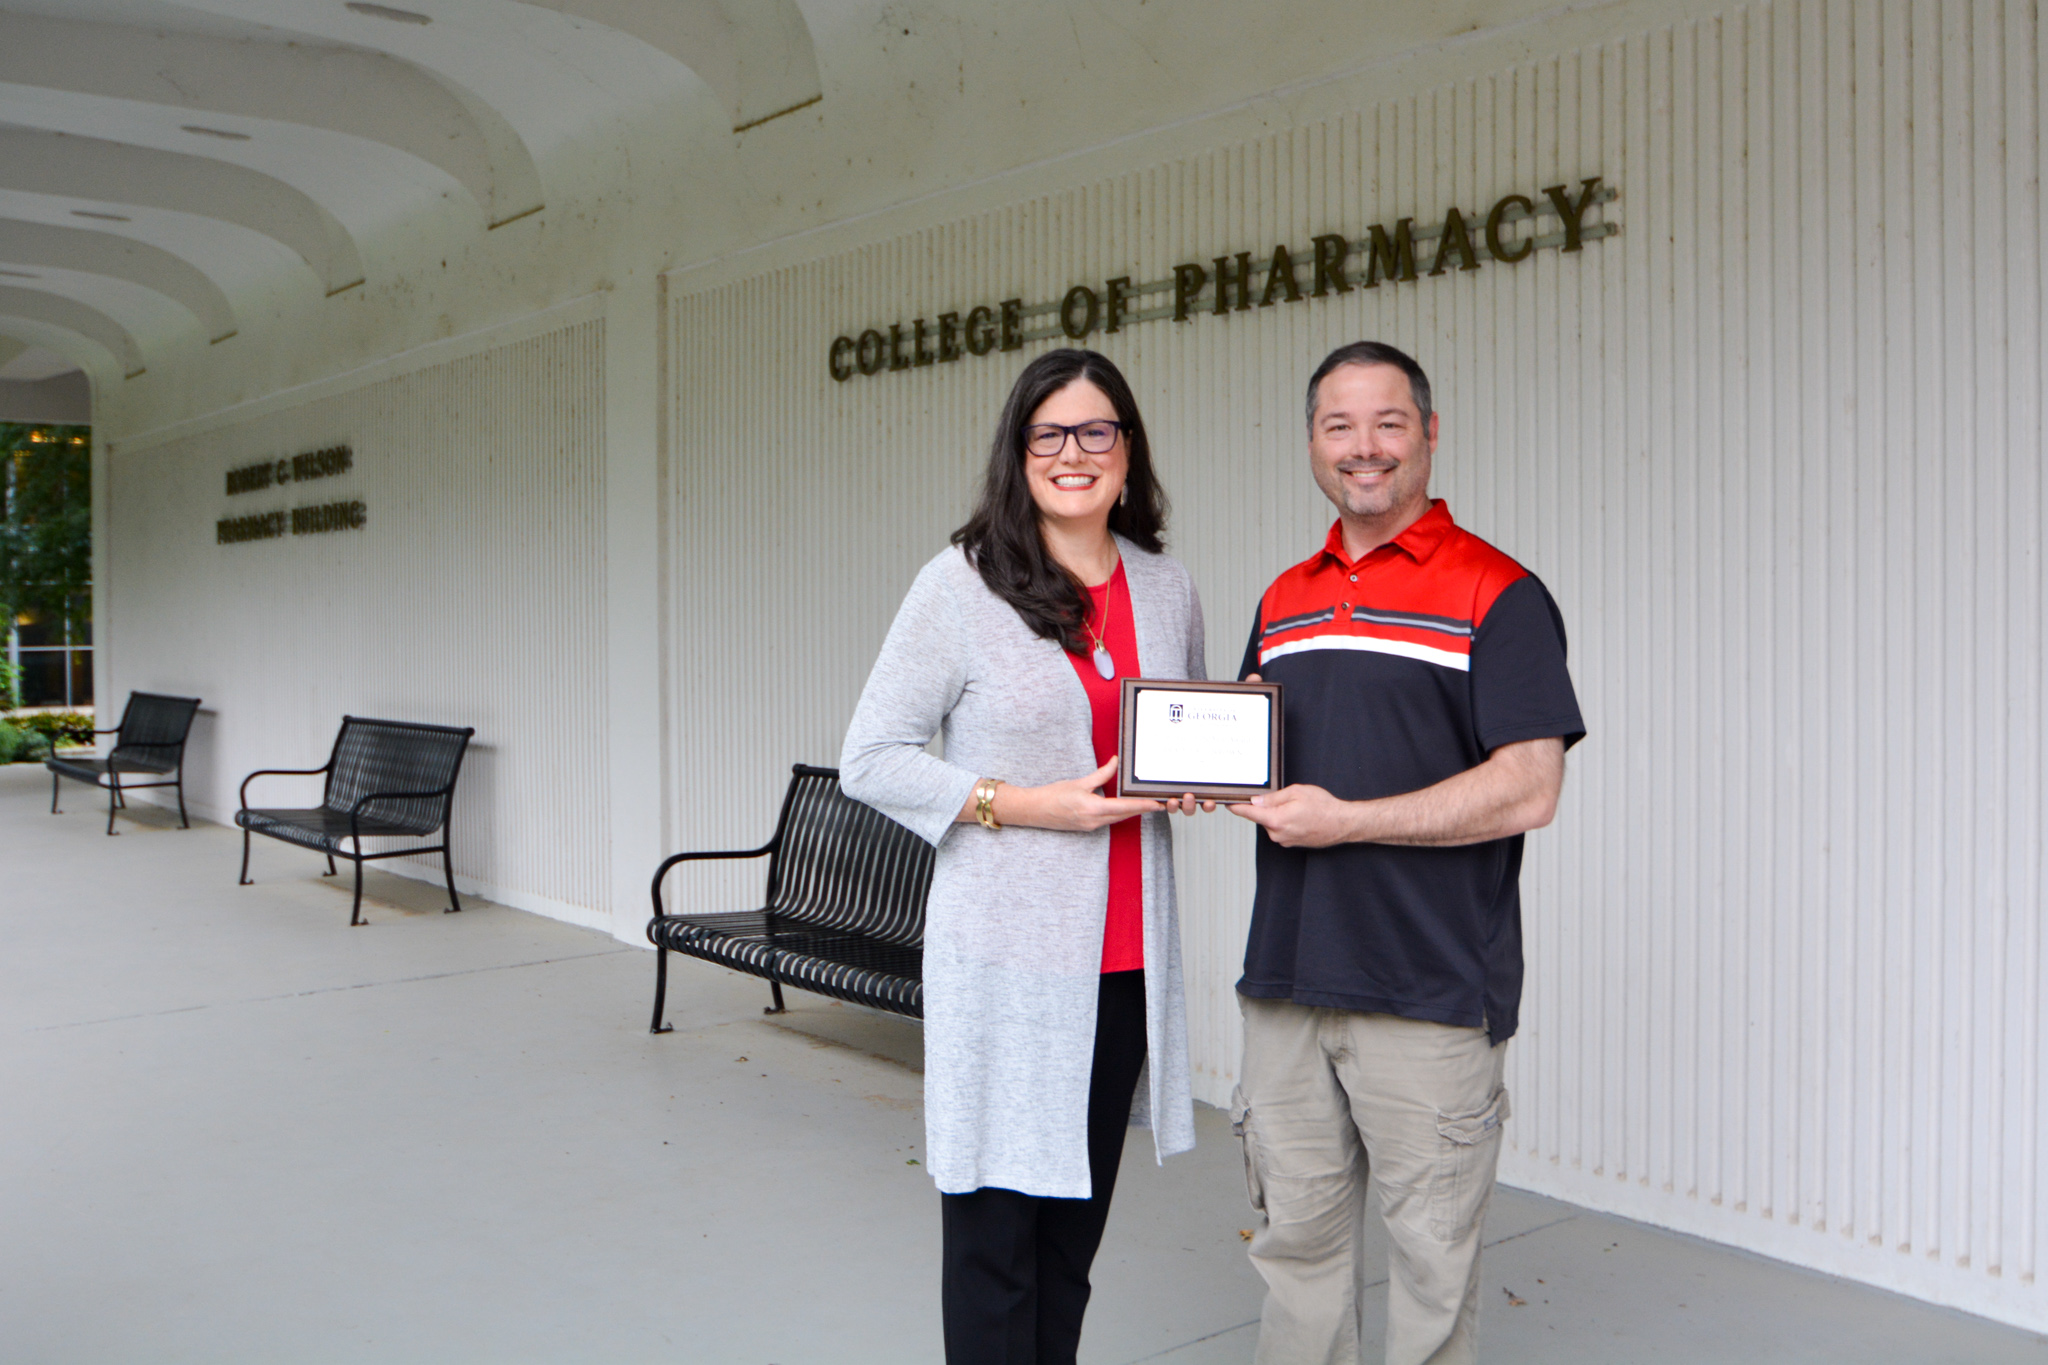 25-Year College of Pharmacy Veteran Named 2020 Employee of the Year